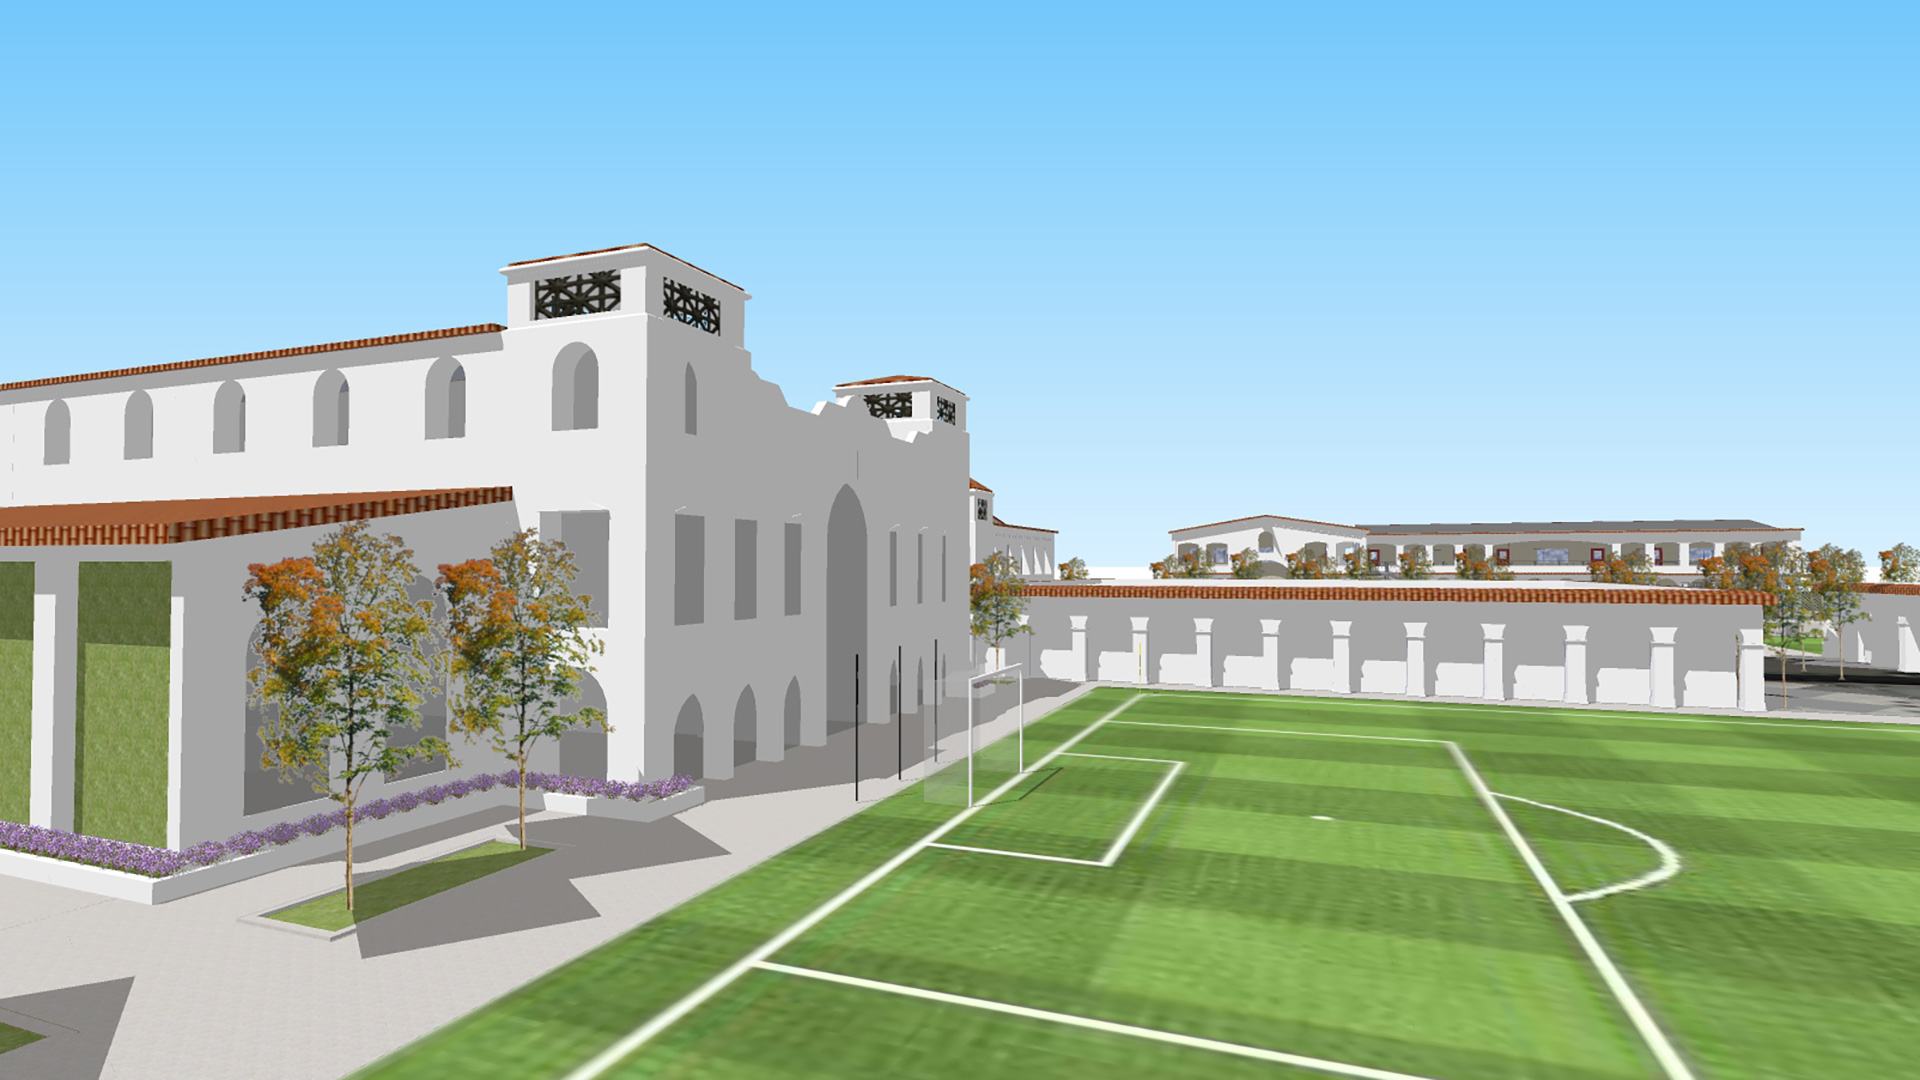 Render of campus sports field adjacent to three-story building with large archway entrance.